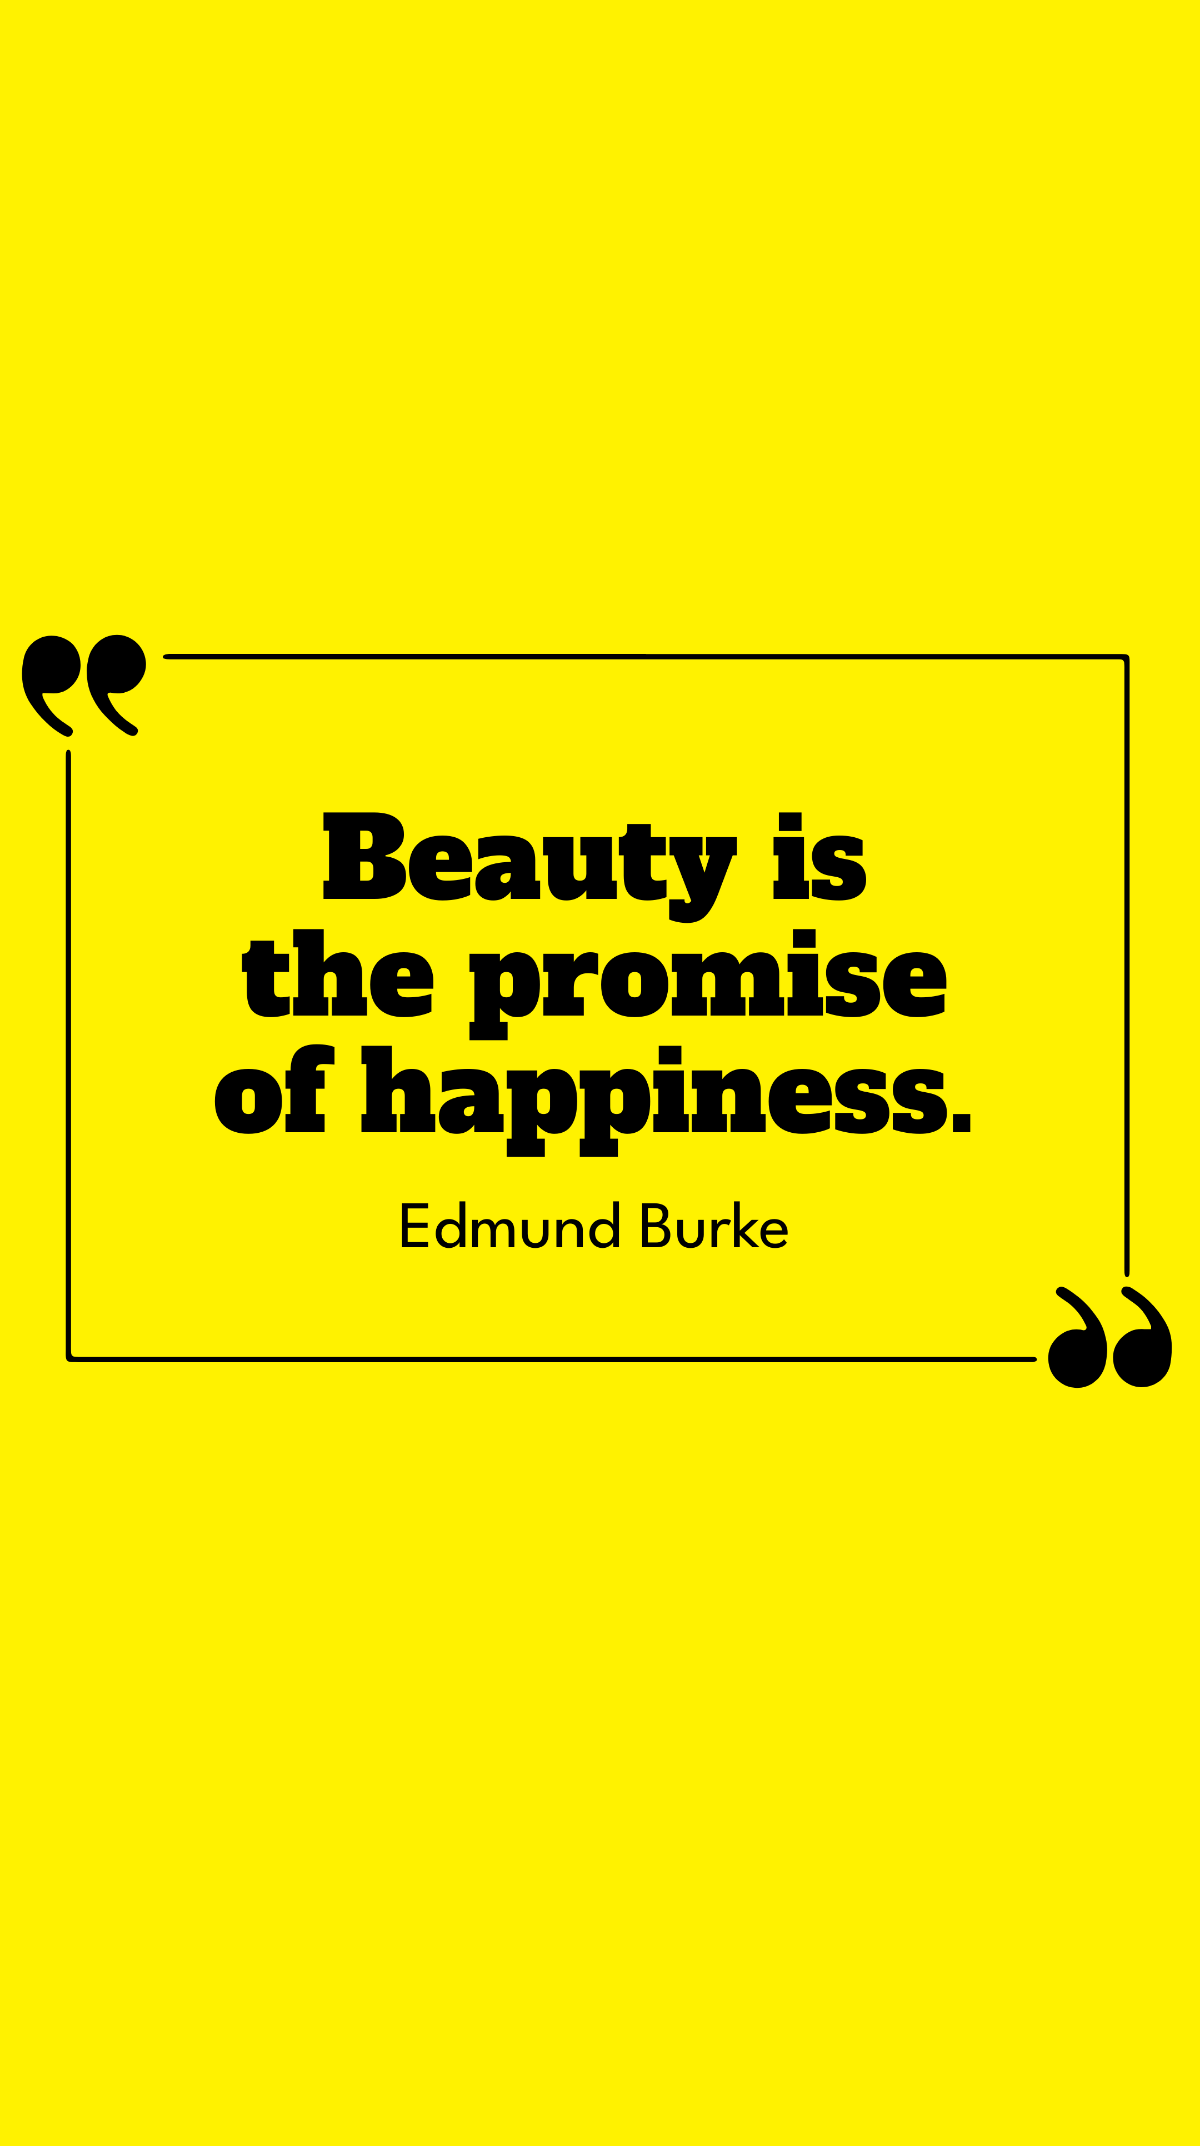 Edmund Burke - Beauty is the promise of happiness.